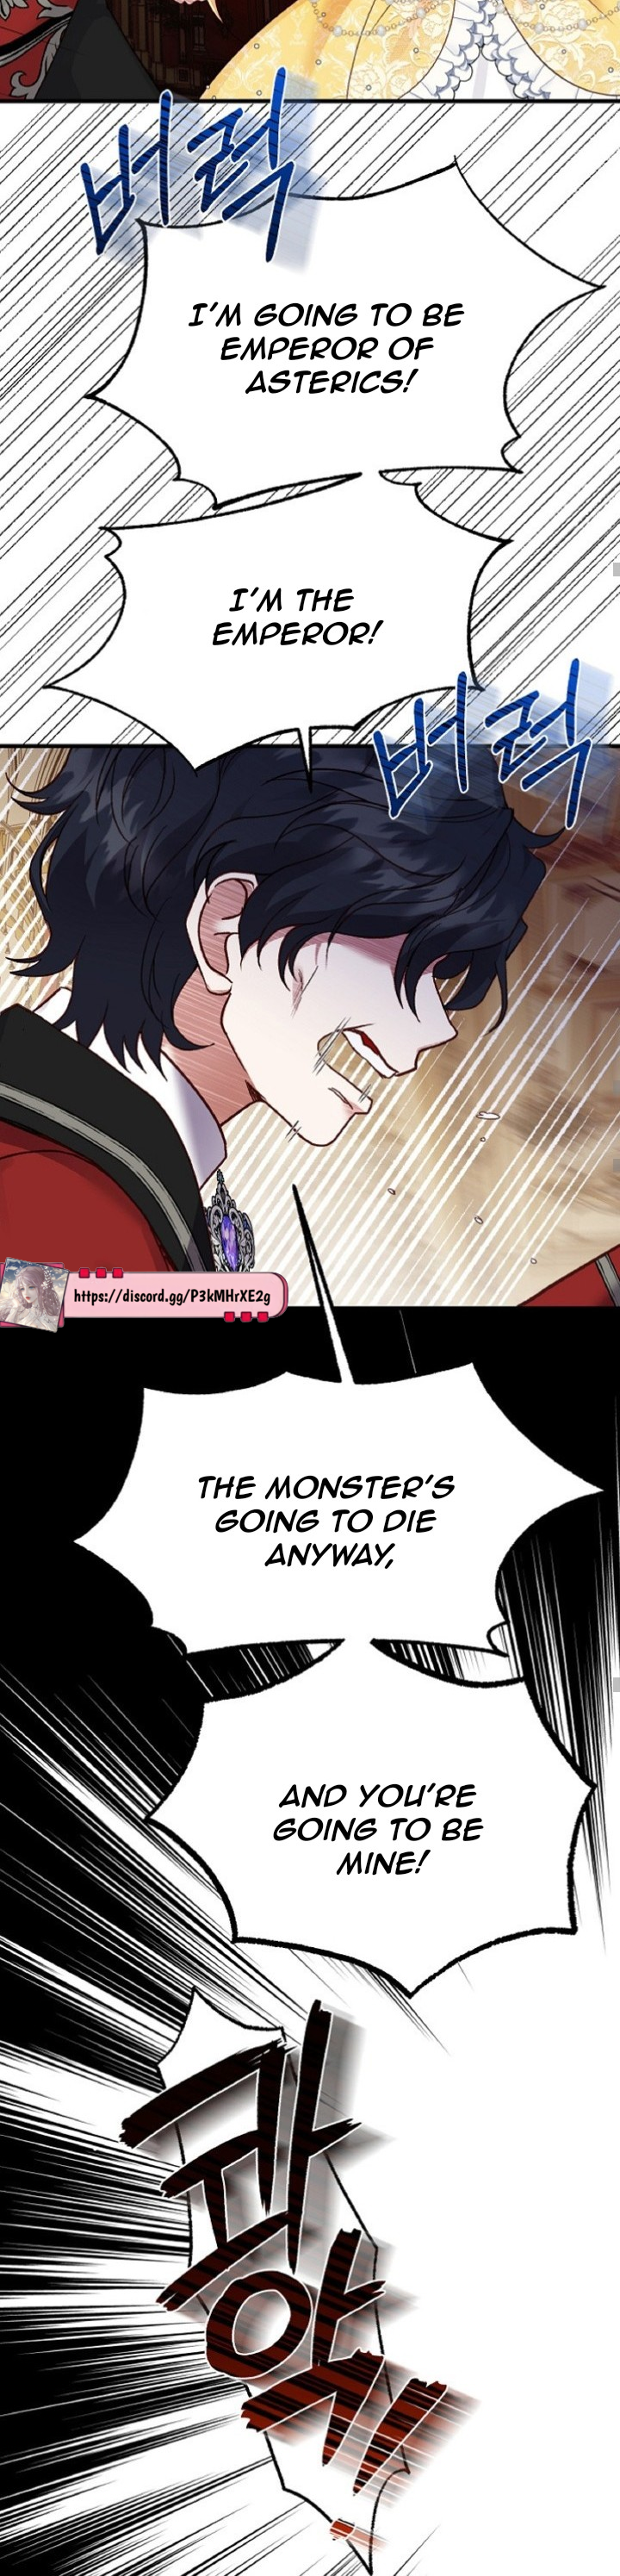 I Became the Wife of the Monstrous Crown Prince Chapter 56 page 14